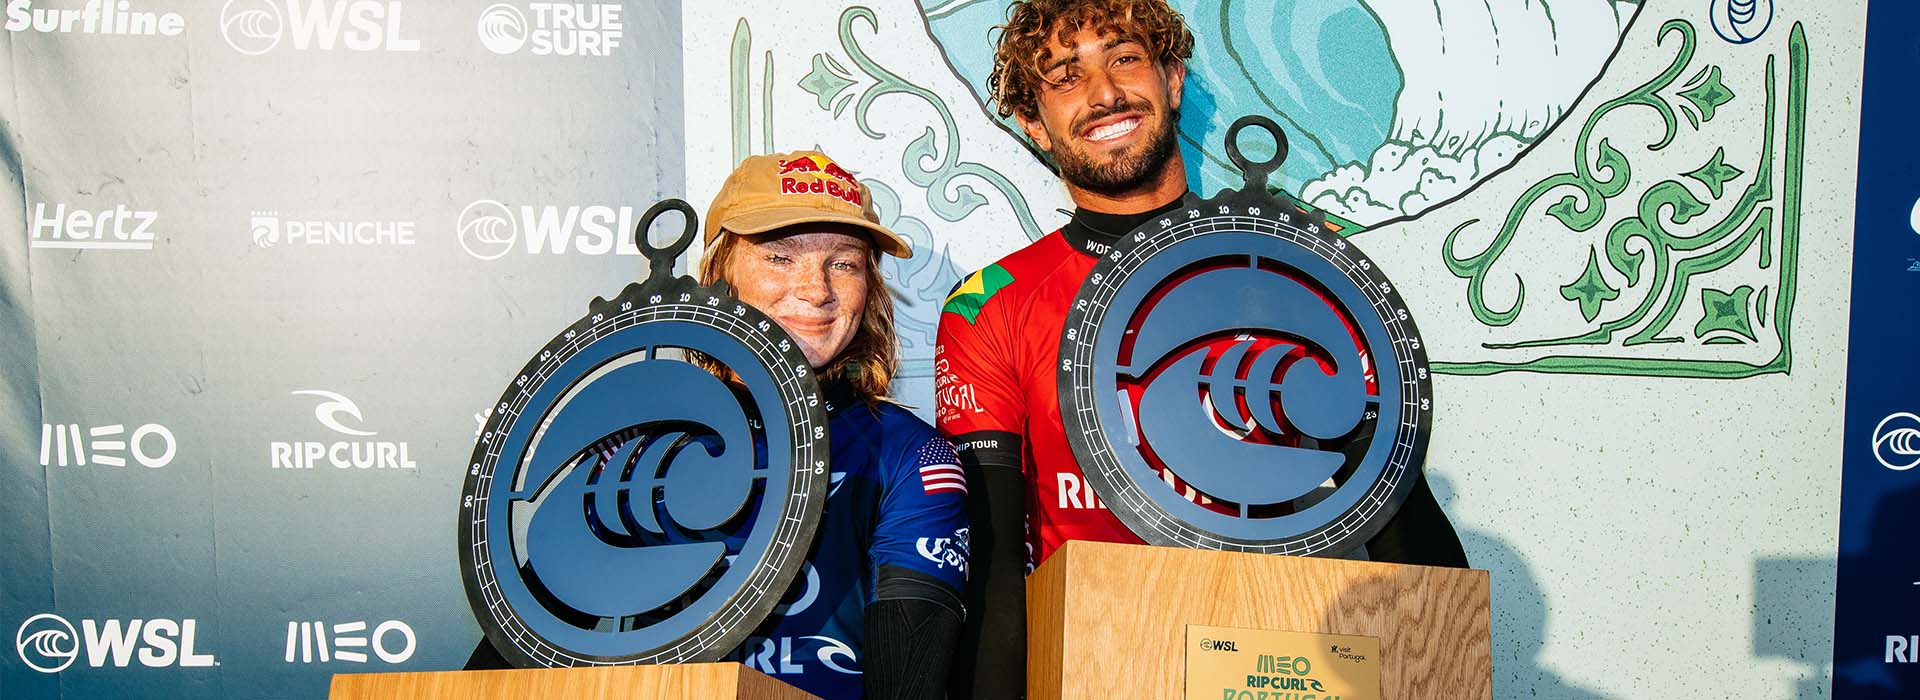 Caitie Simmers and Joa Chianca win the MEO Rip Curl Pro Portugal